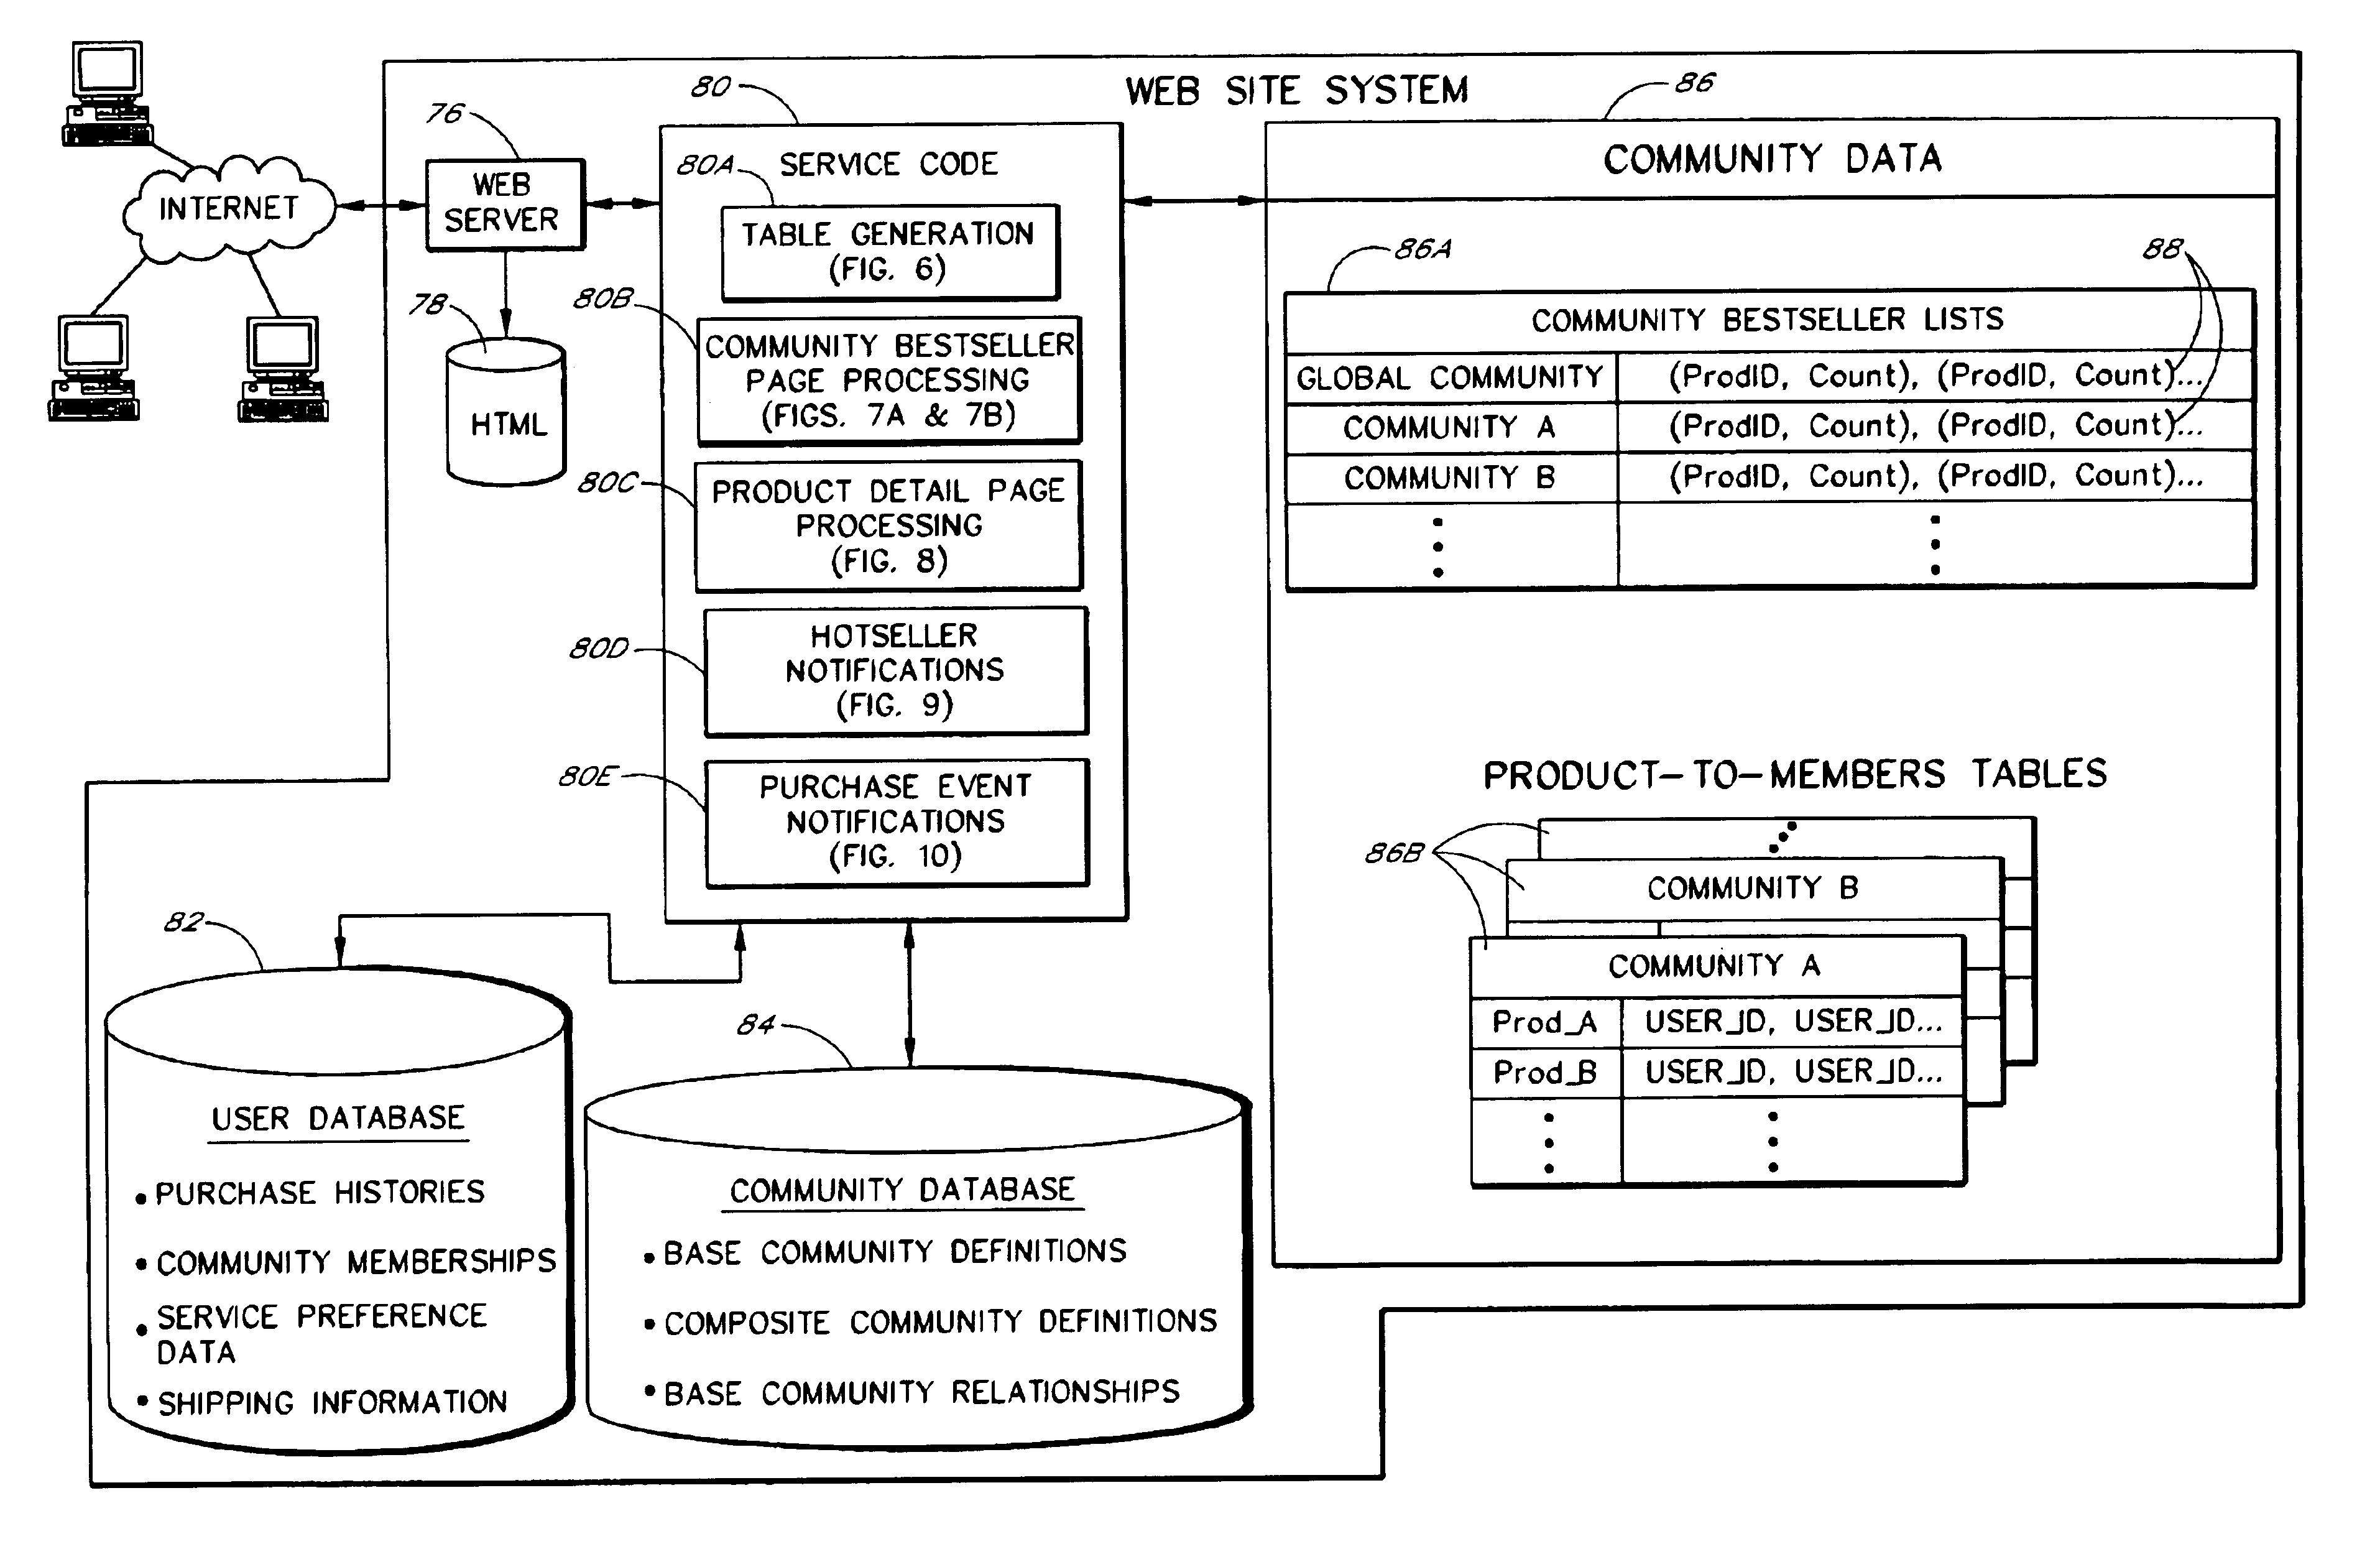 Computer services for assisting users in locating and evaluating items in an electronic catalog based on actions performed by members of specific user communities